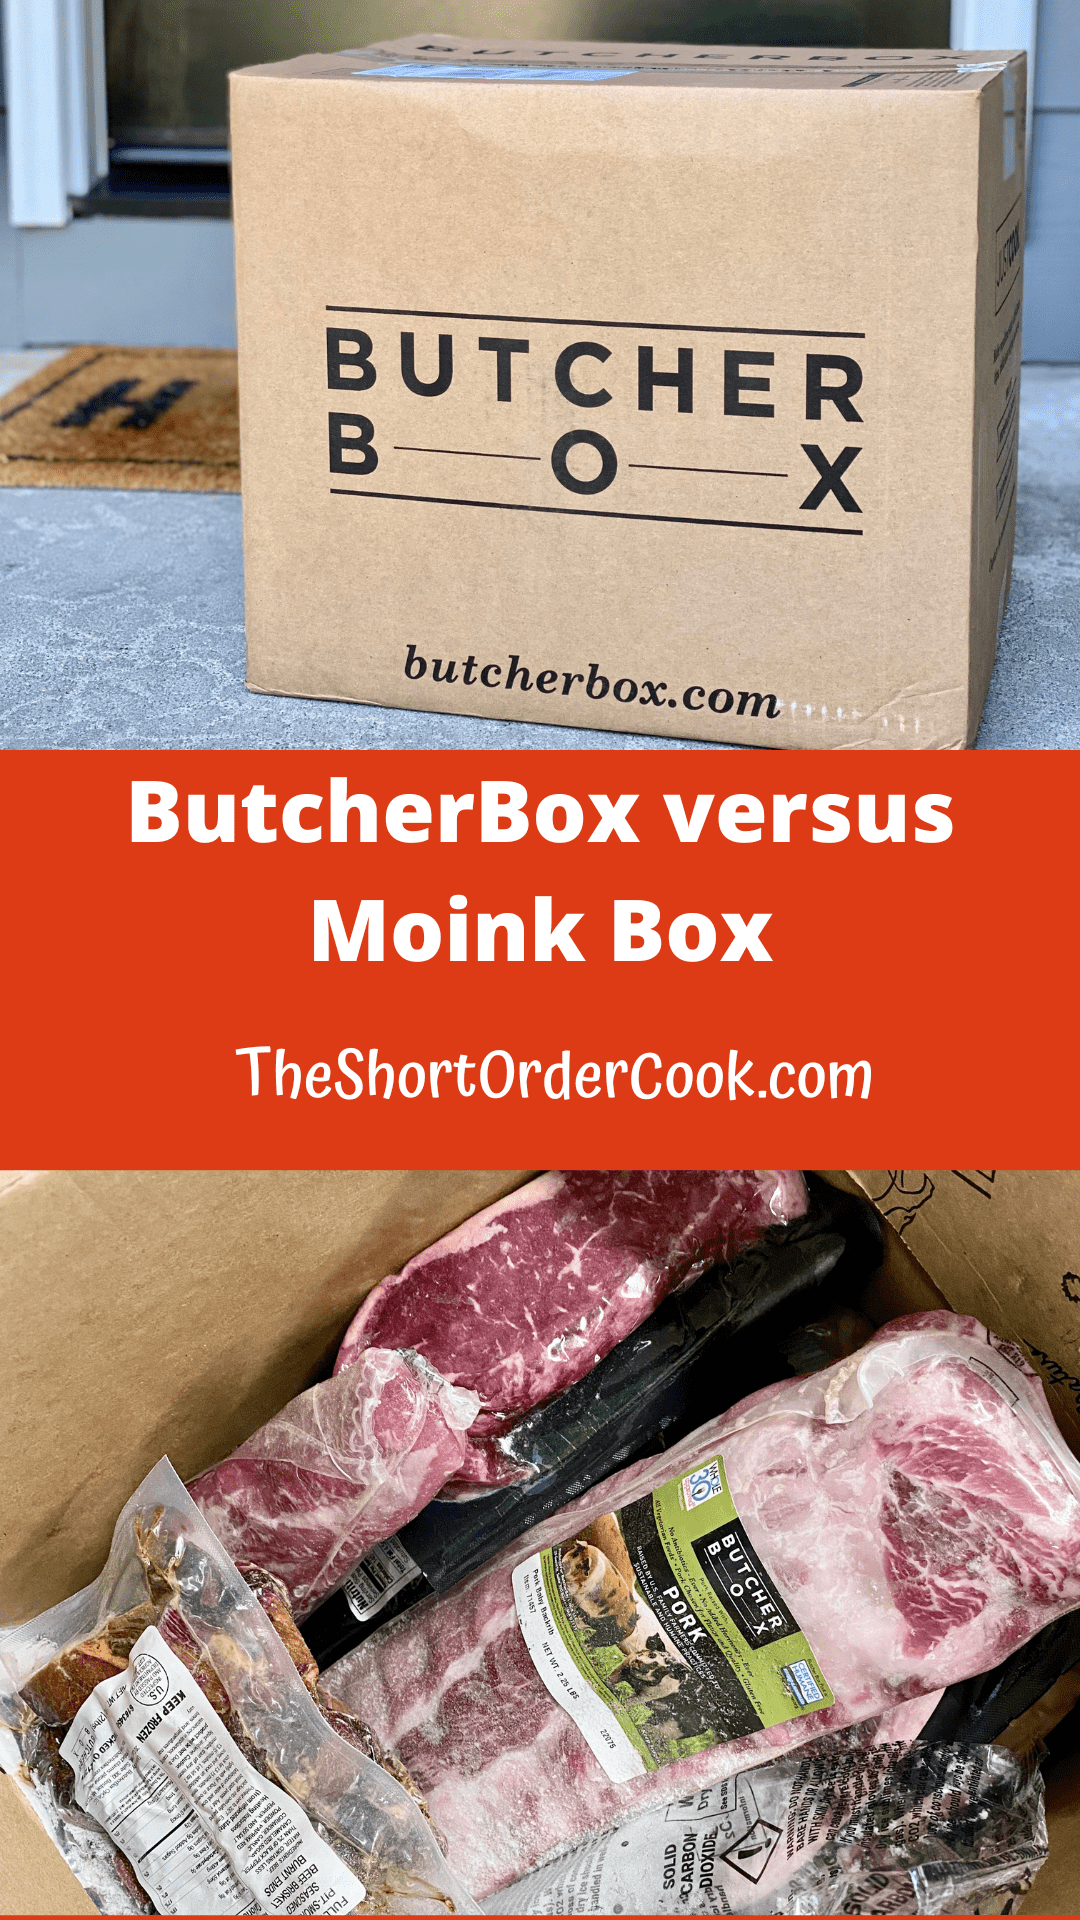 Two images of a ButcherBox delivery box on the front porch and inside the box with frozen packaged meats.